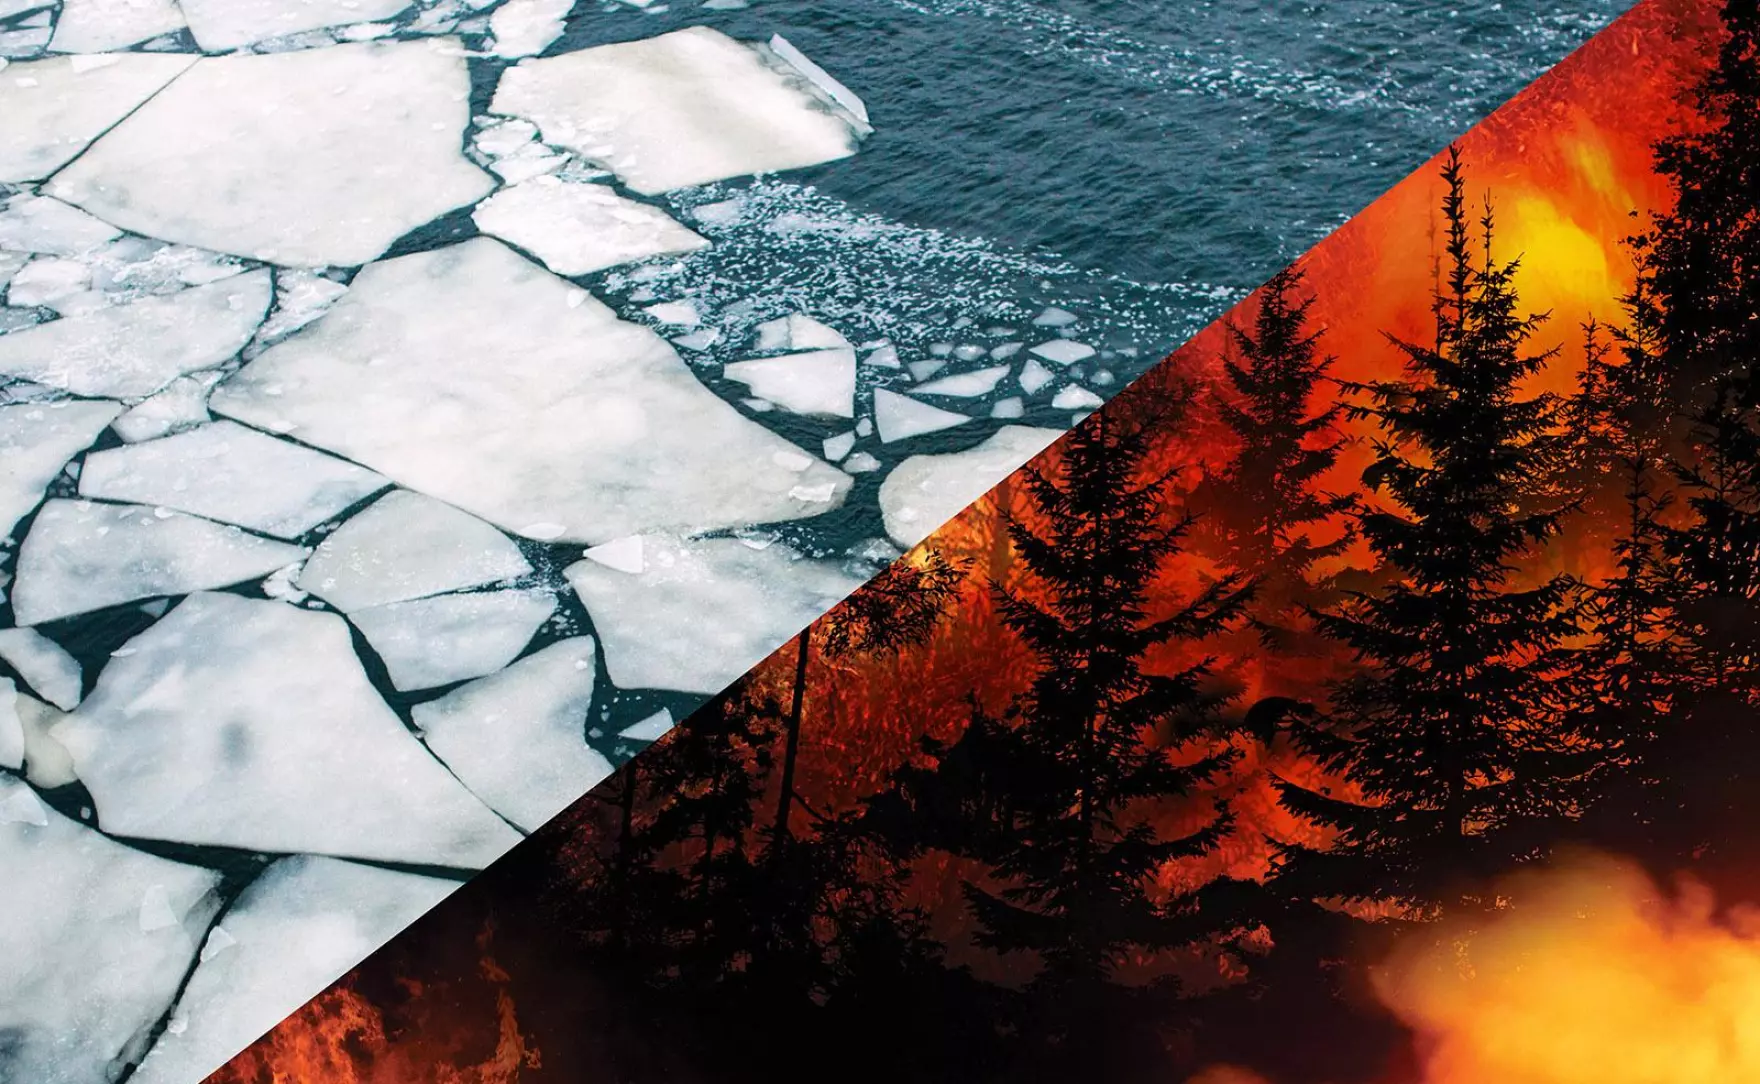 New atmospheric research has found melting sea ice in the Arctic increases the risks for wildfires on the West Coast.